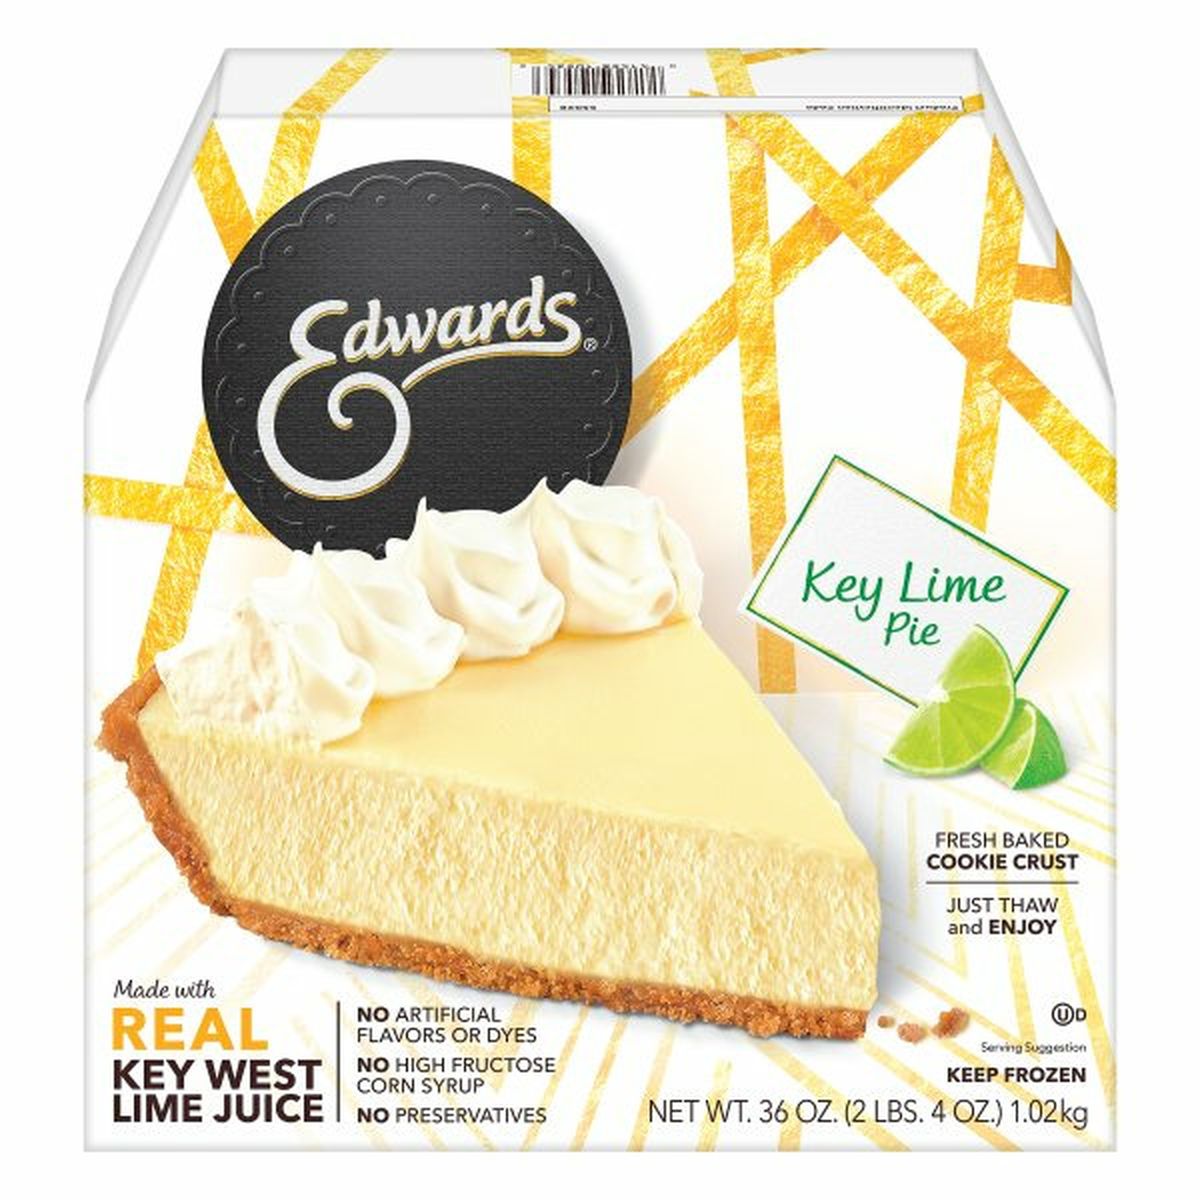 Calories in Edwards Pie, Key Lime